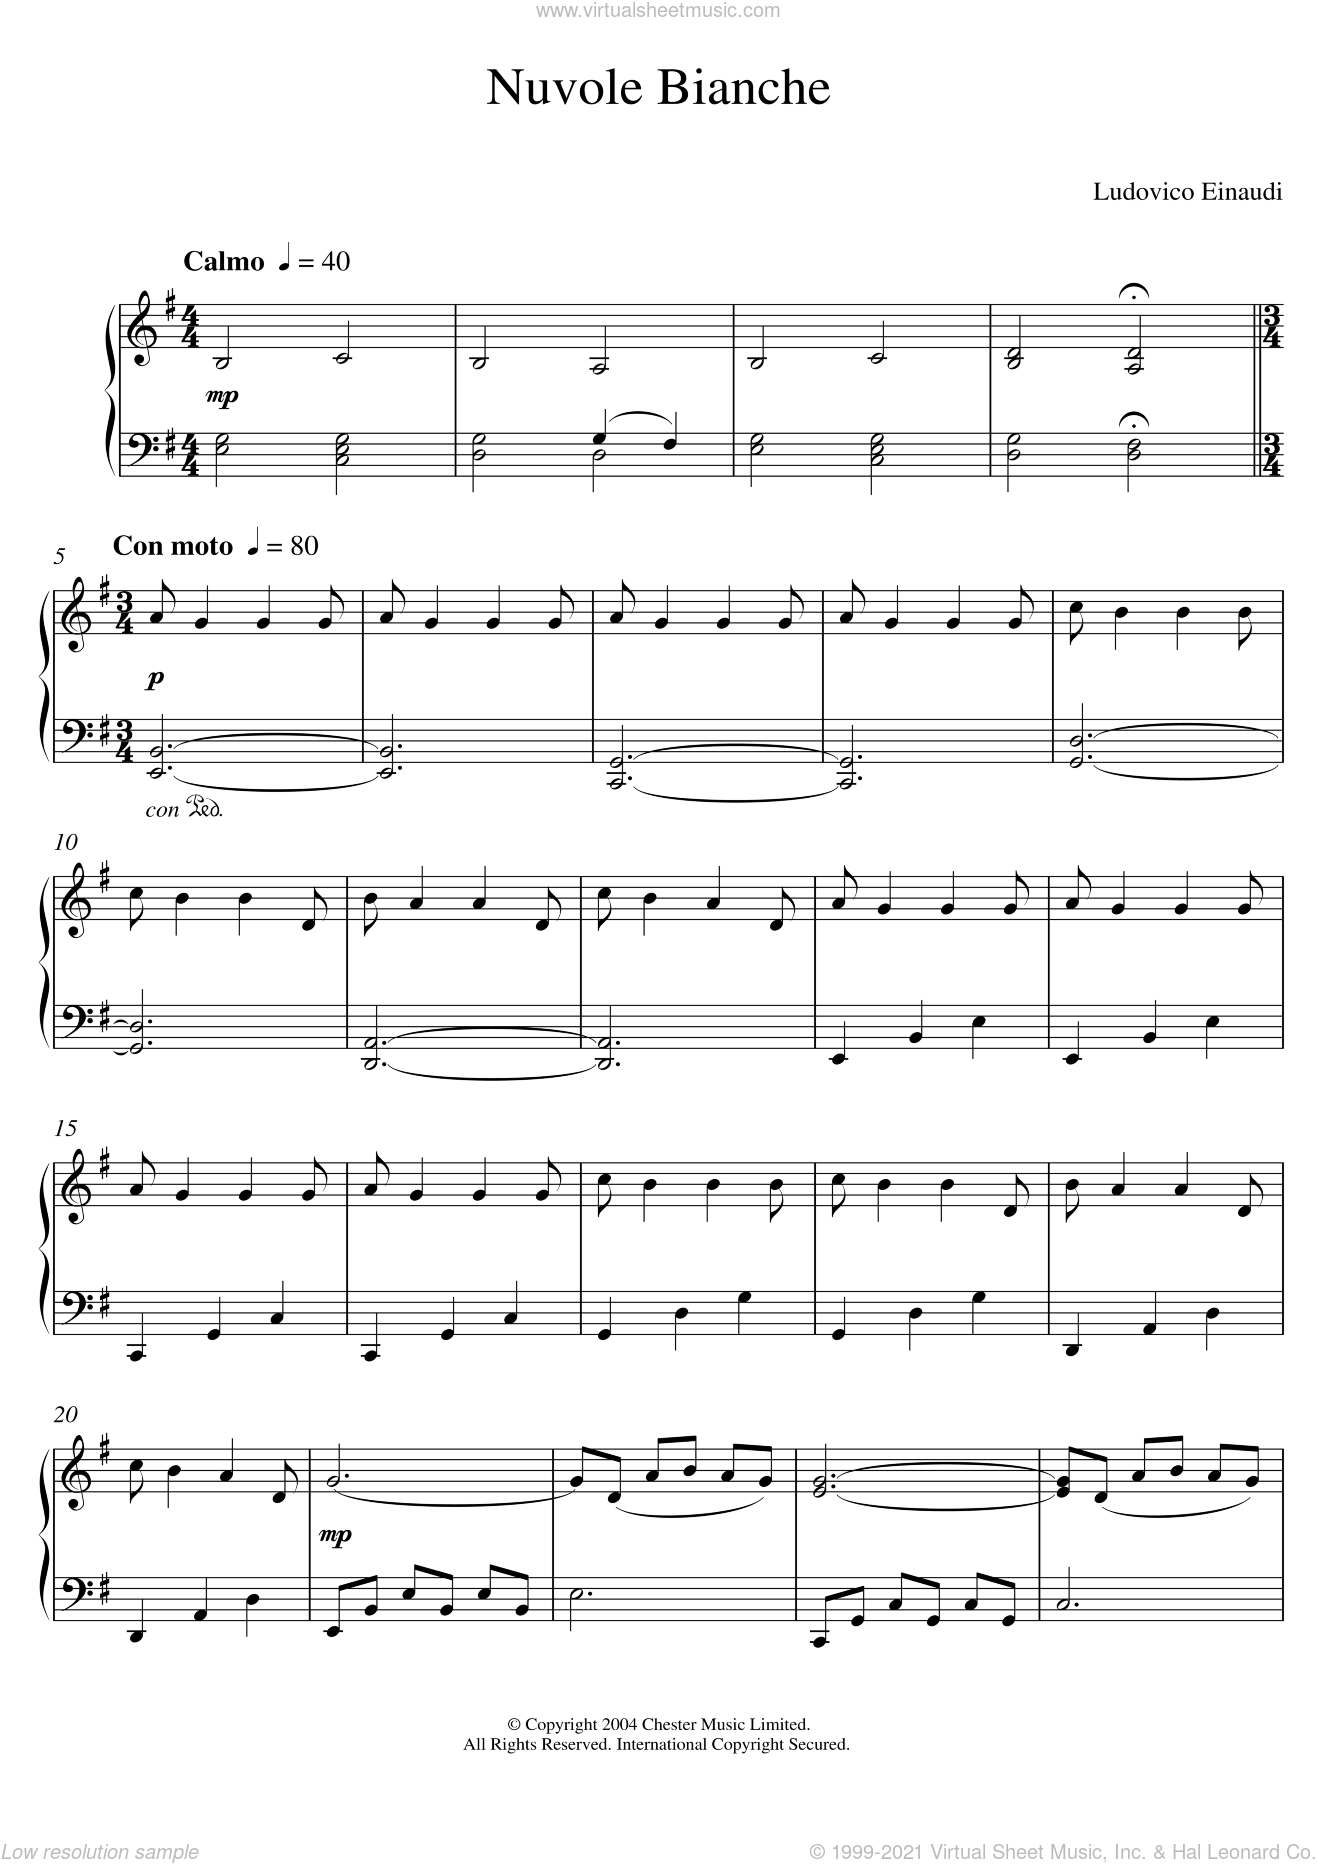 Einaudi Nuvole Bianche Sheet Music For Piano Solo Elementary Sign up now or log in to get the full version for the best price online. nuvole bianche by ludovico einaudi. einaudi nuvole bianche sheet music for piano solo elementary